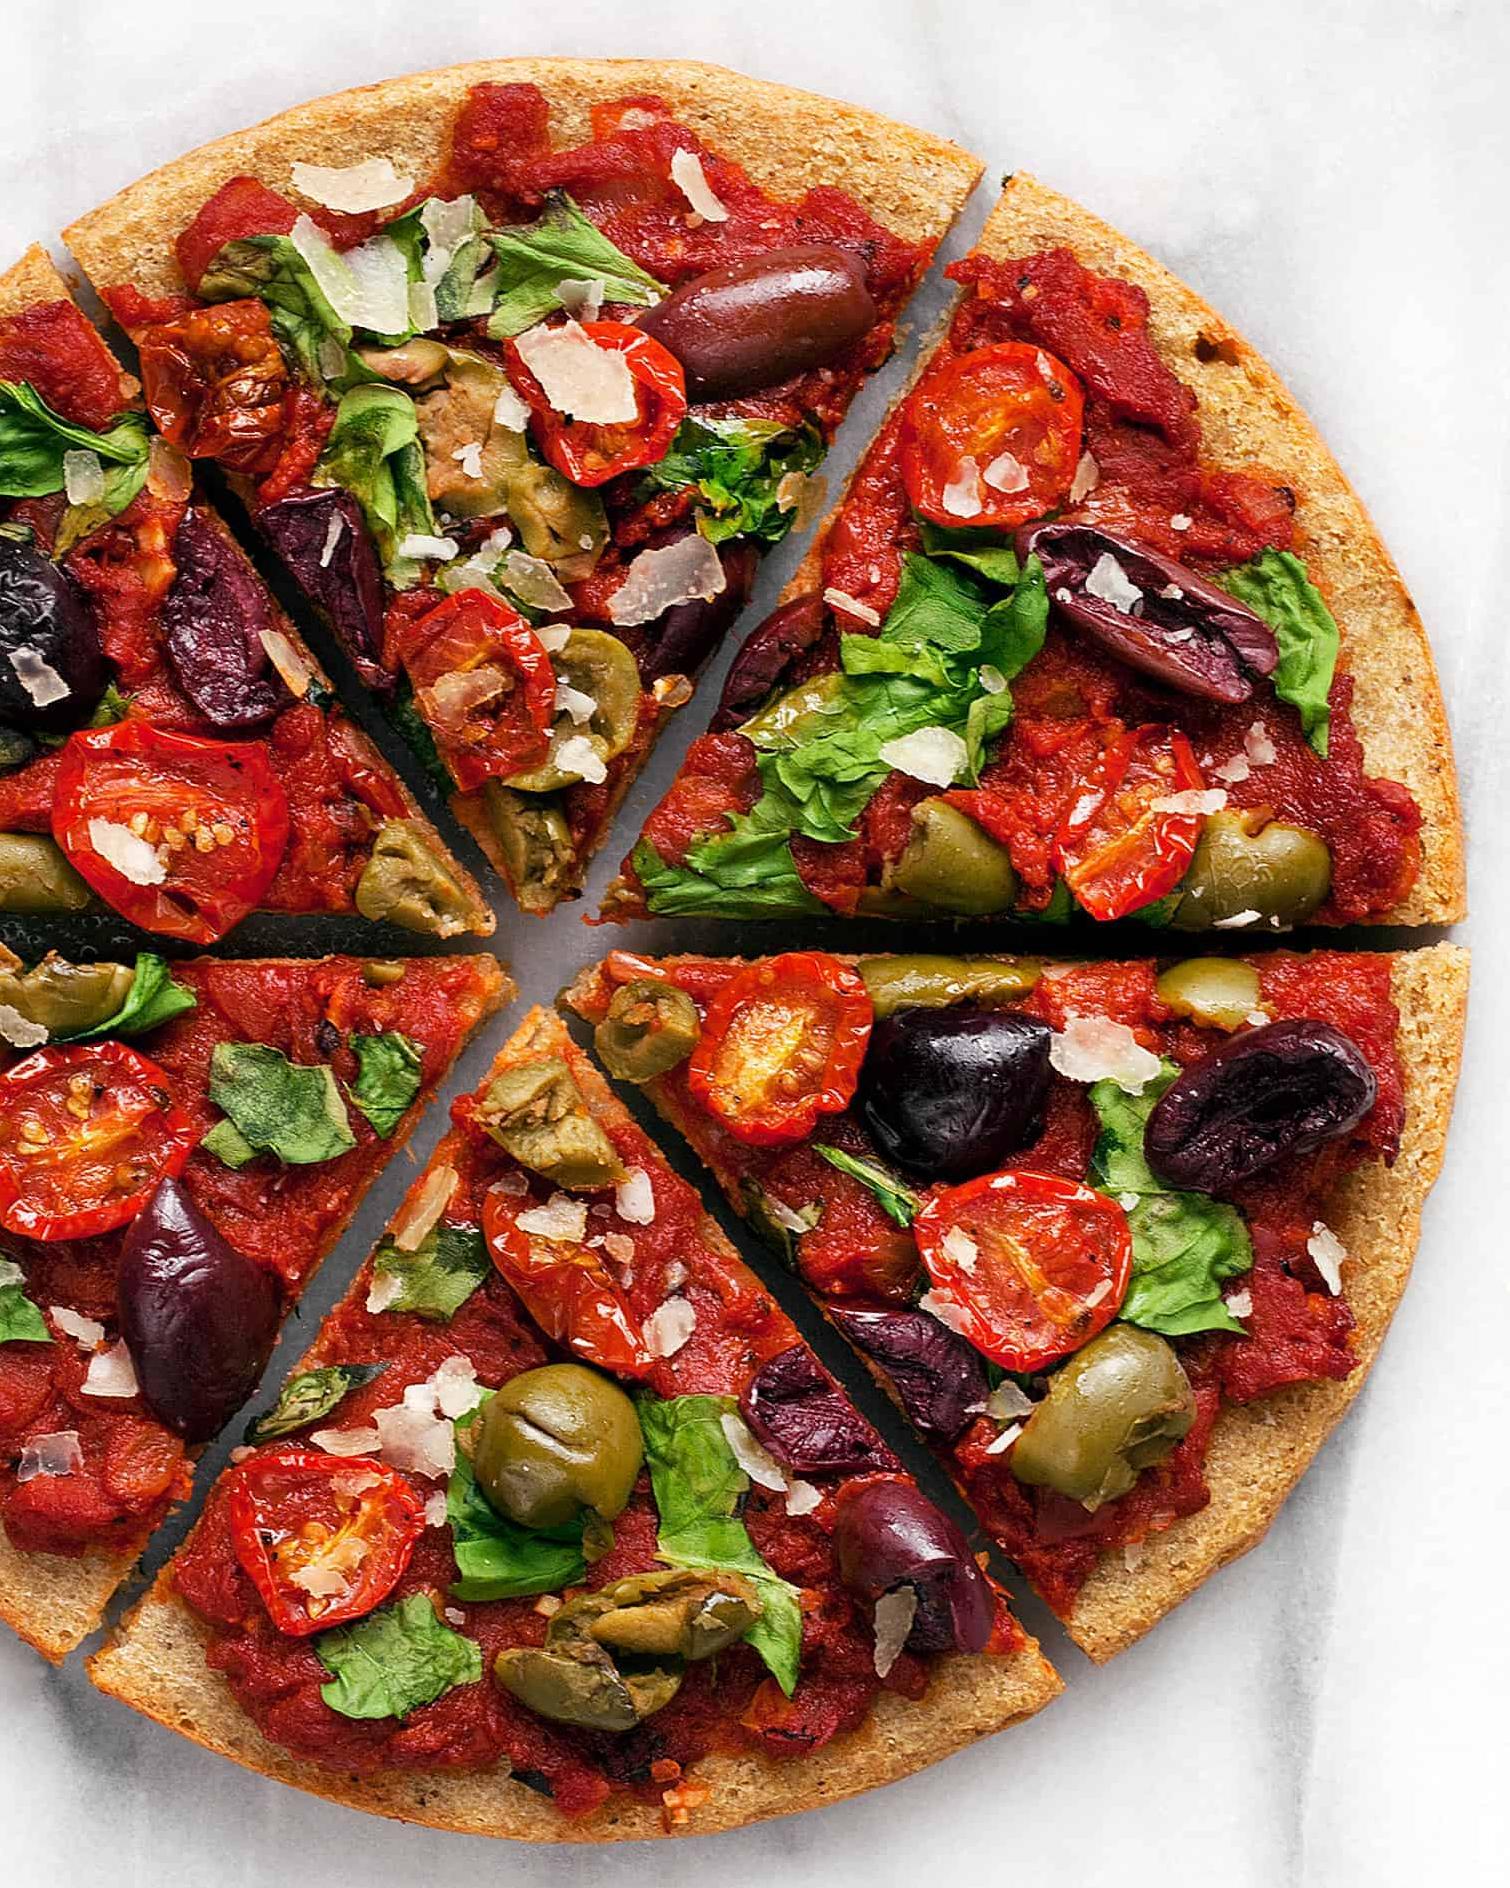  With this recipe, you can satisfy those pizza cravings without any guilt!